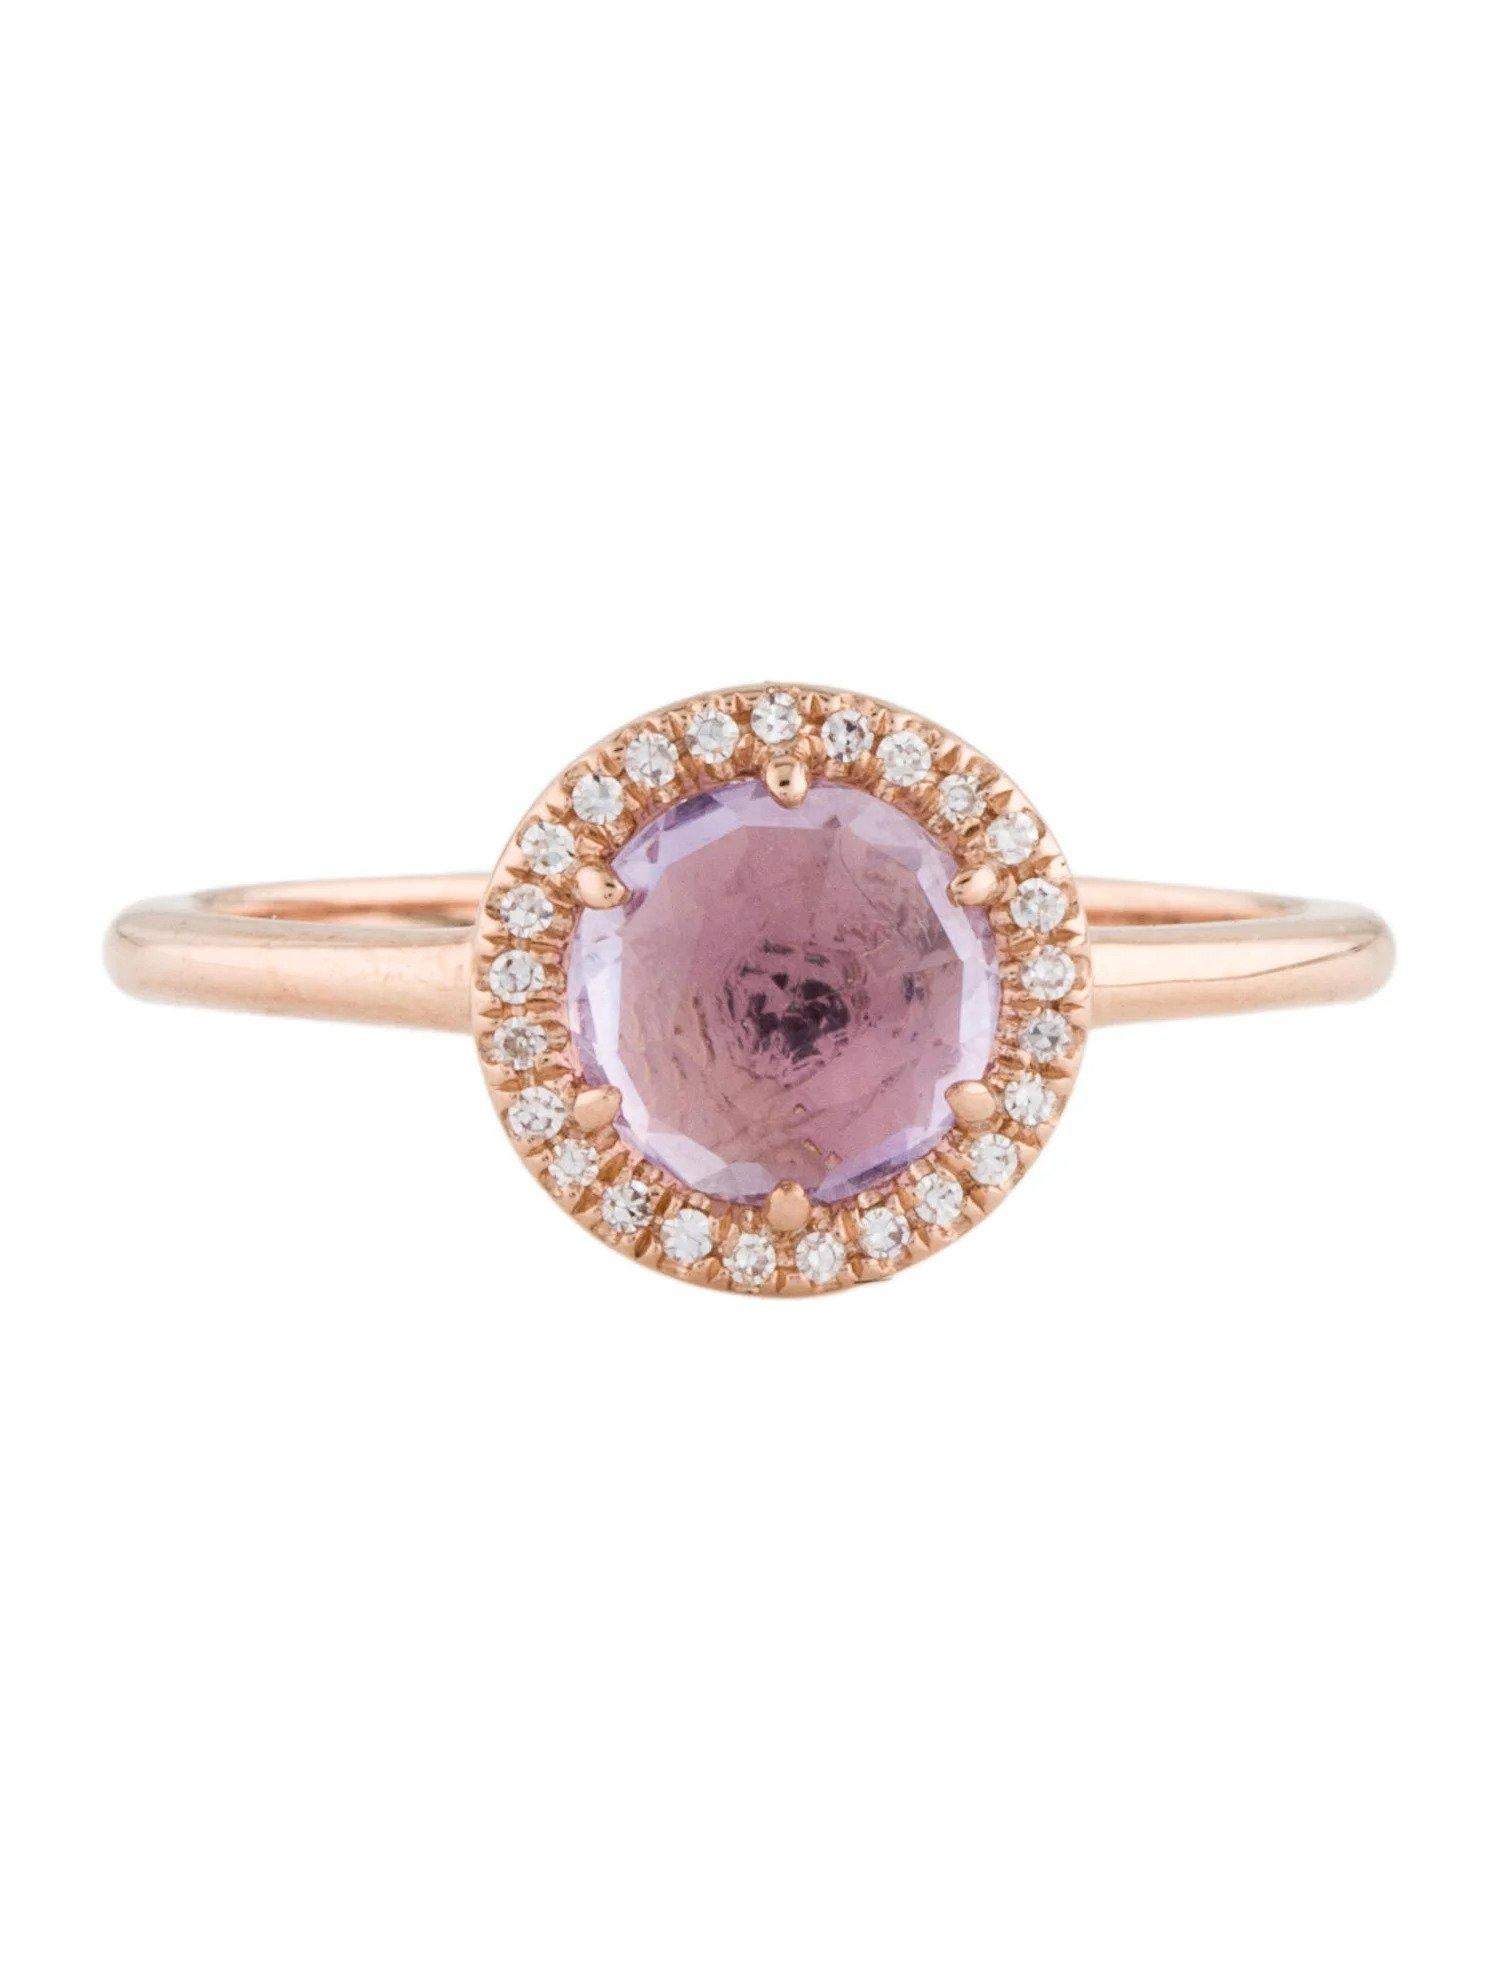 This Amethyst & Diamond Ring is a stunning and timeless accessory that can add a touch of glamour and sophistication to any outfit. 

This ring features a 0.93 Carat Round Pink Amethyst, with a Diamond Halo comprised of 0.06 Carats of Single Cut